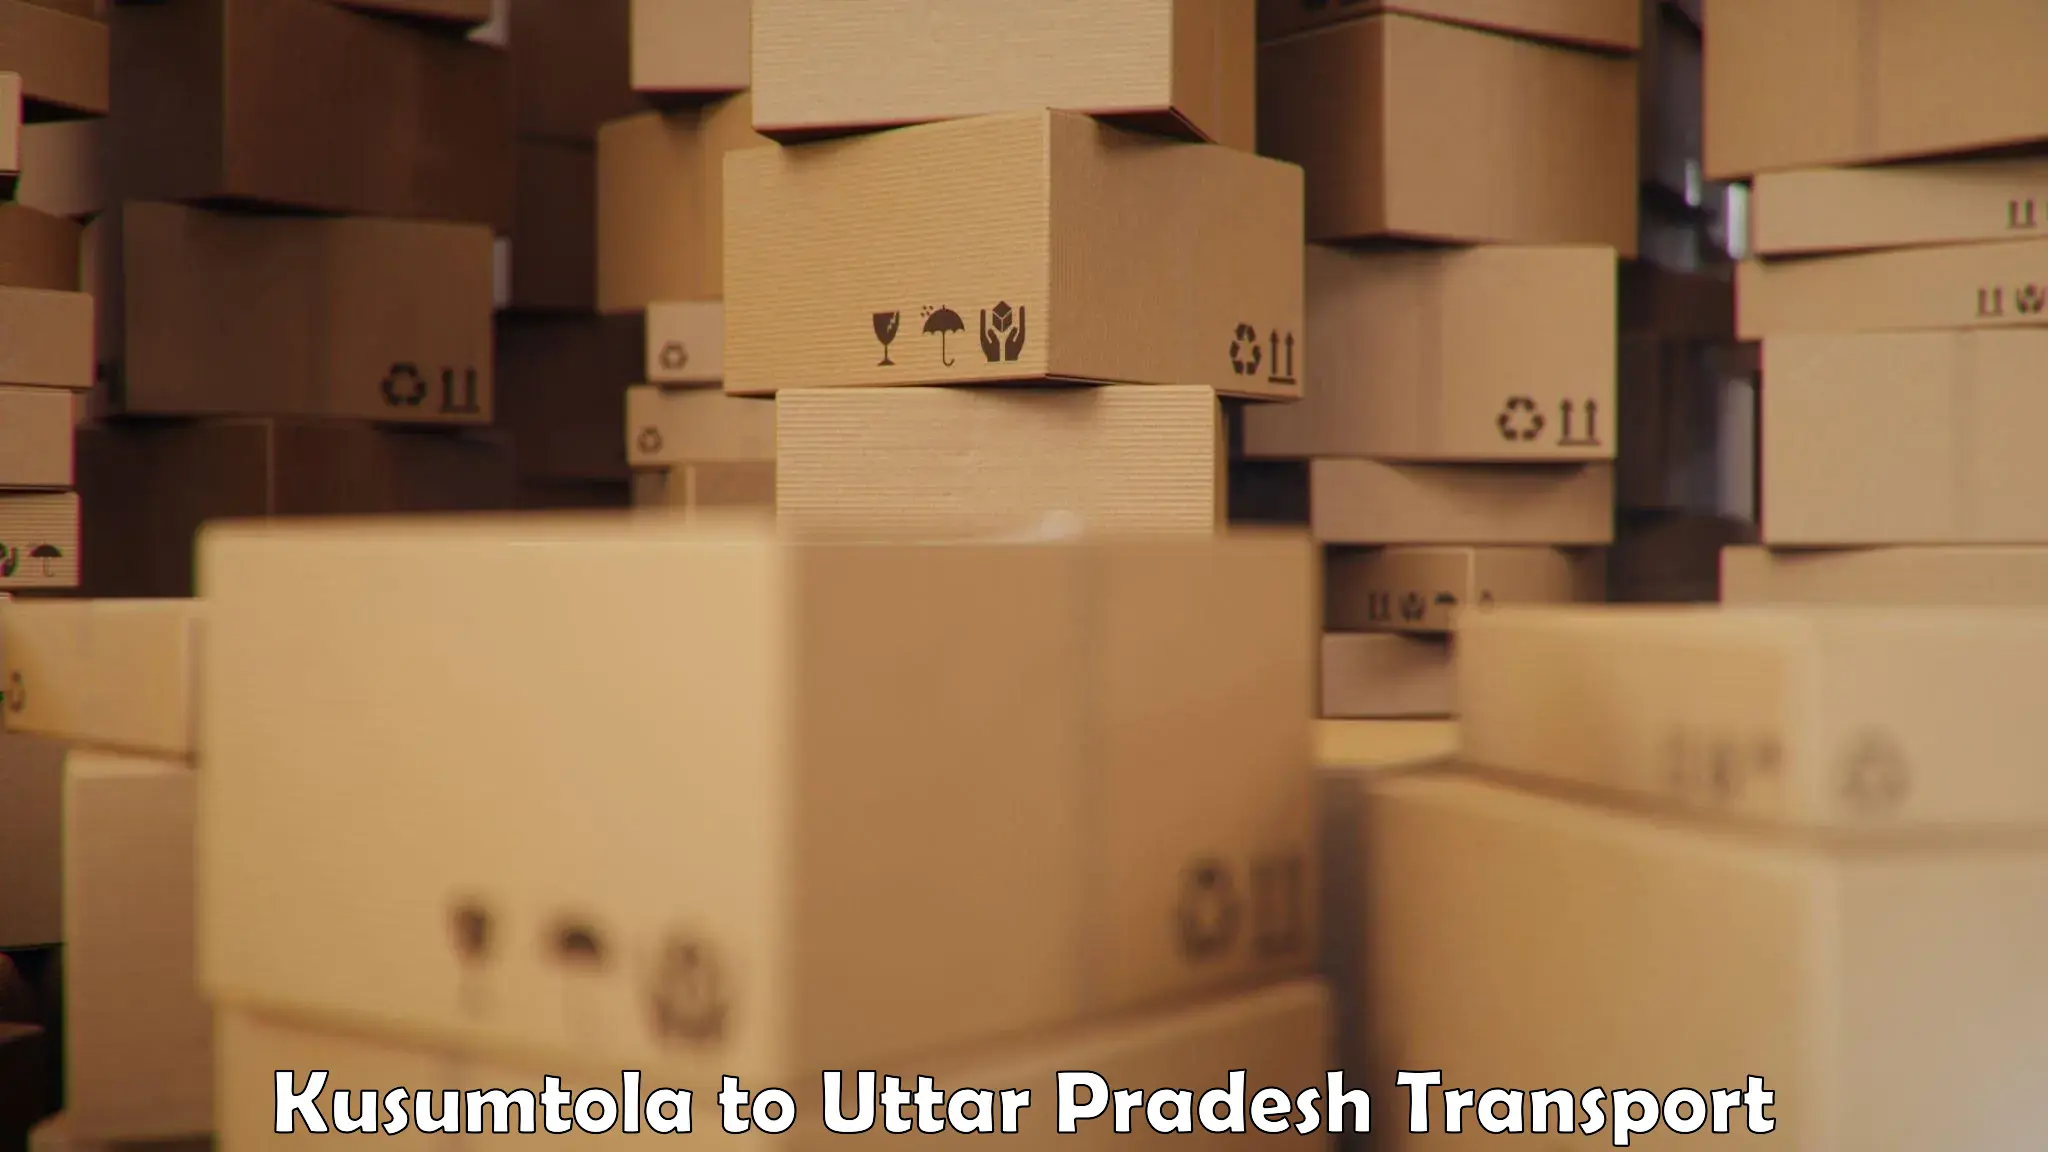 Truck transport companies in India Kusumtola to Sitapur